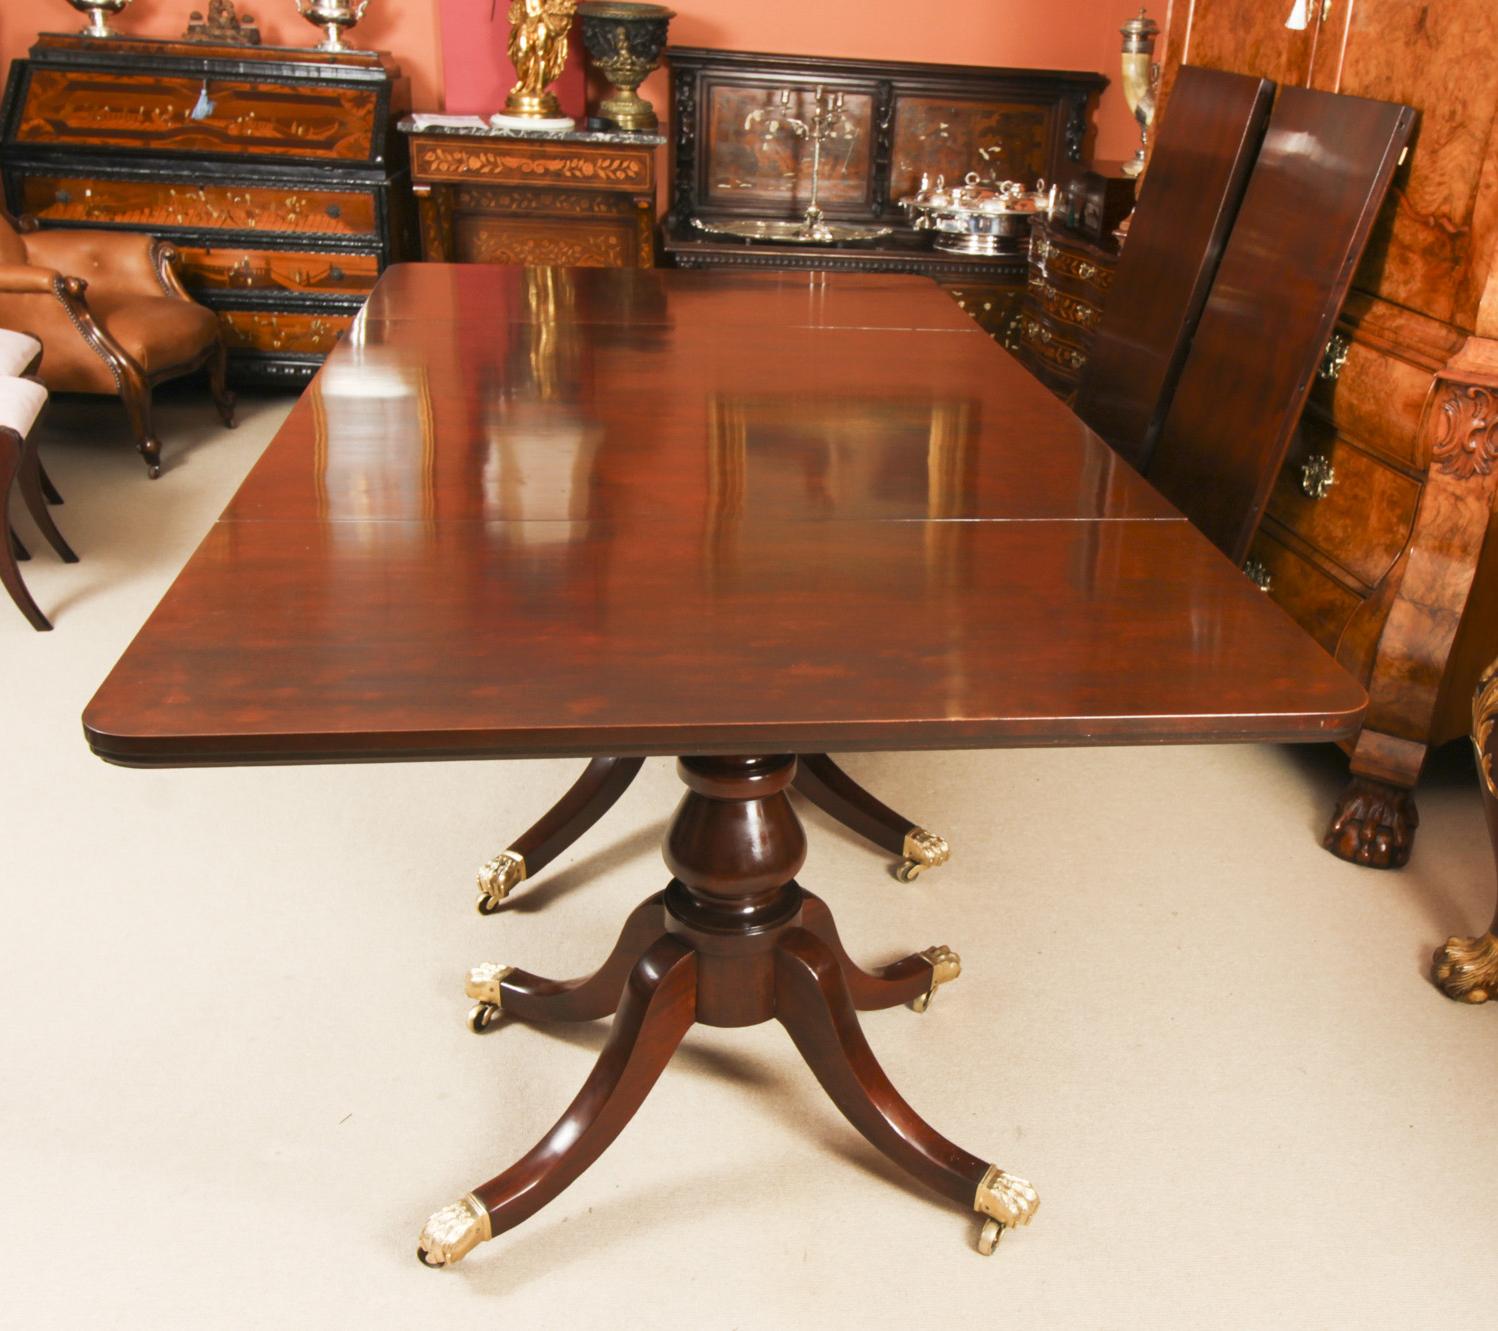 Antique George III Regency Dining Table with 12 Regency Dining Chairs 19th C 1